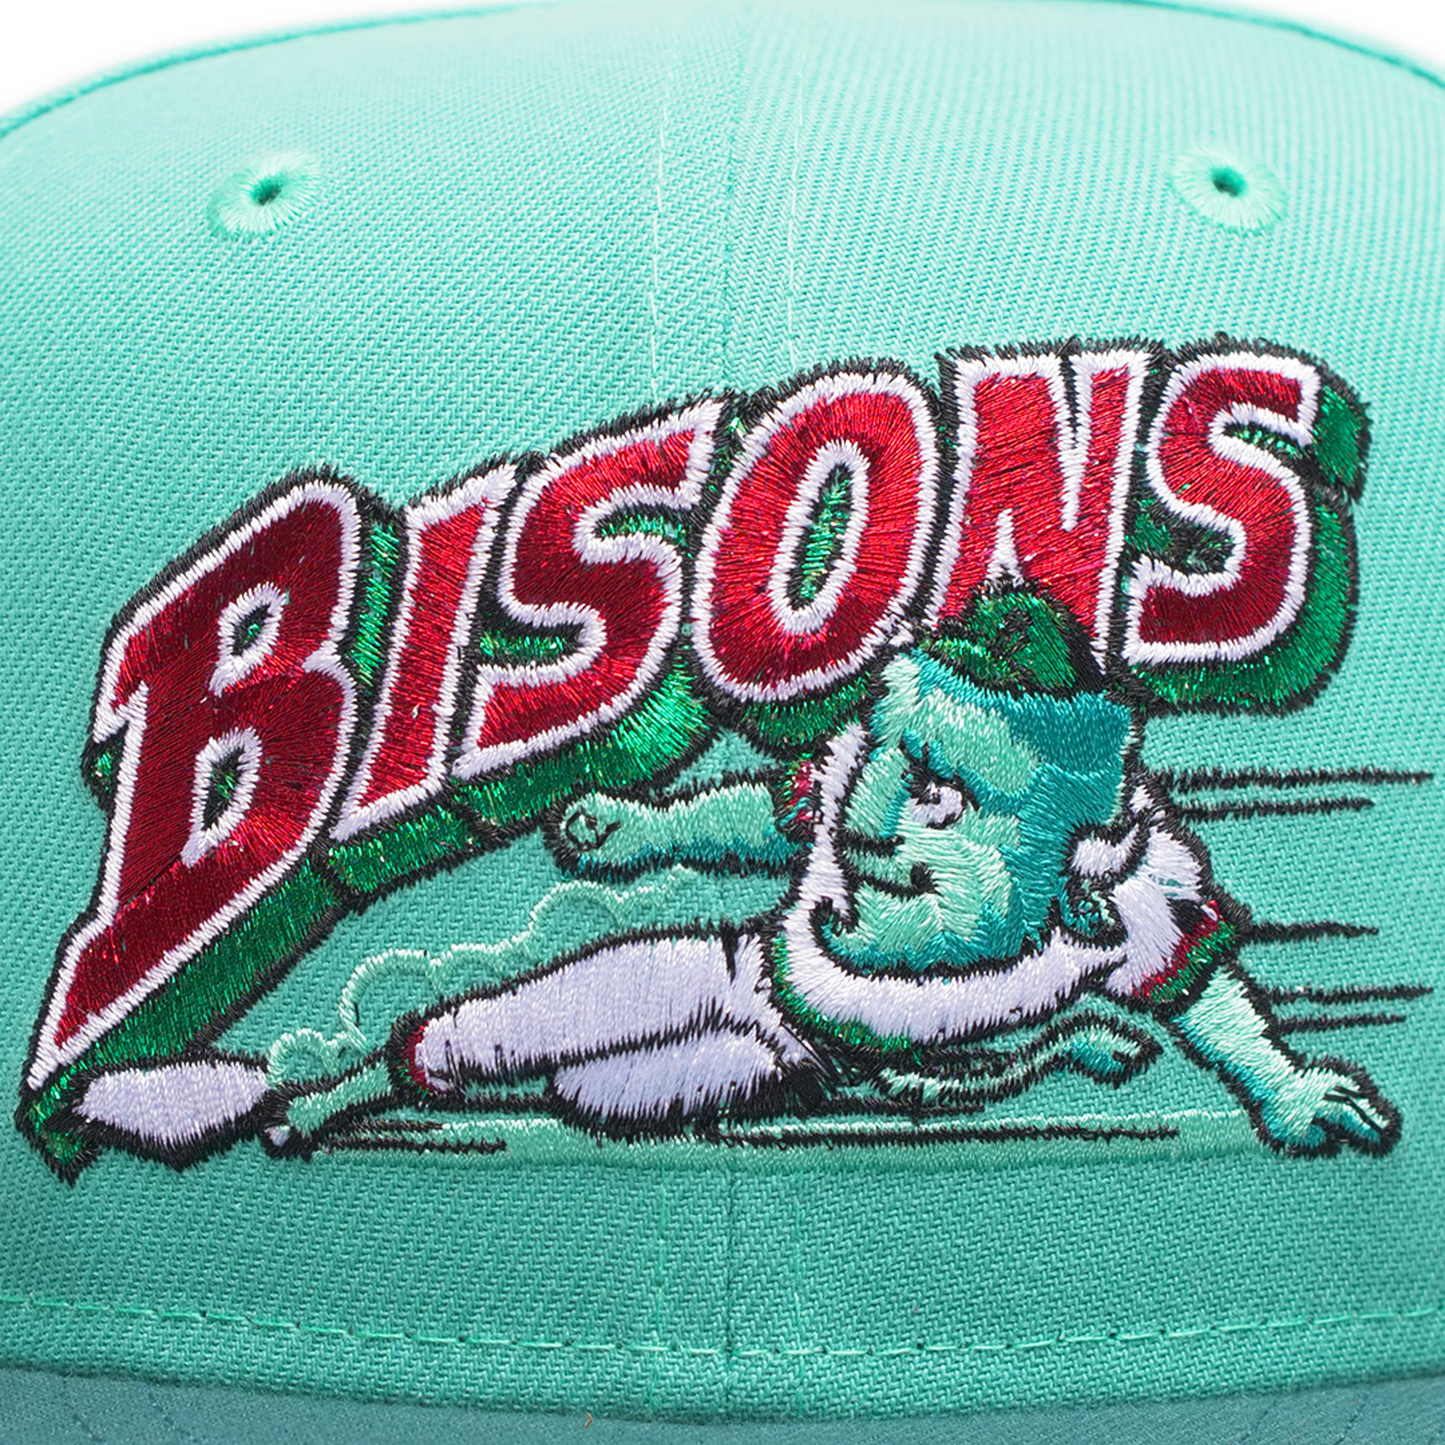 New Era Buffalo Bisons 59Fifty Fitted Hat - Mint/ Pine green